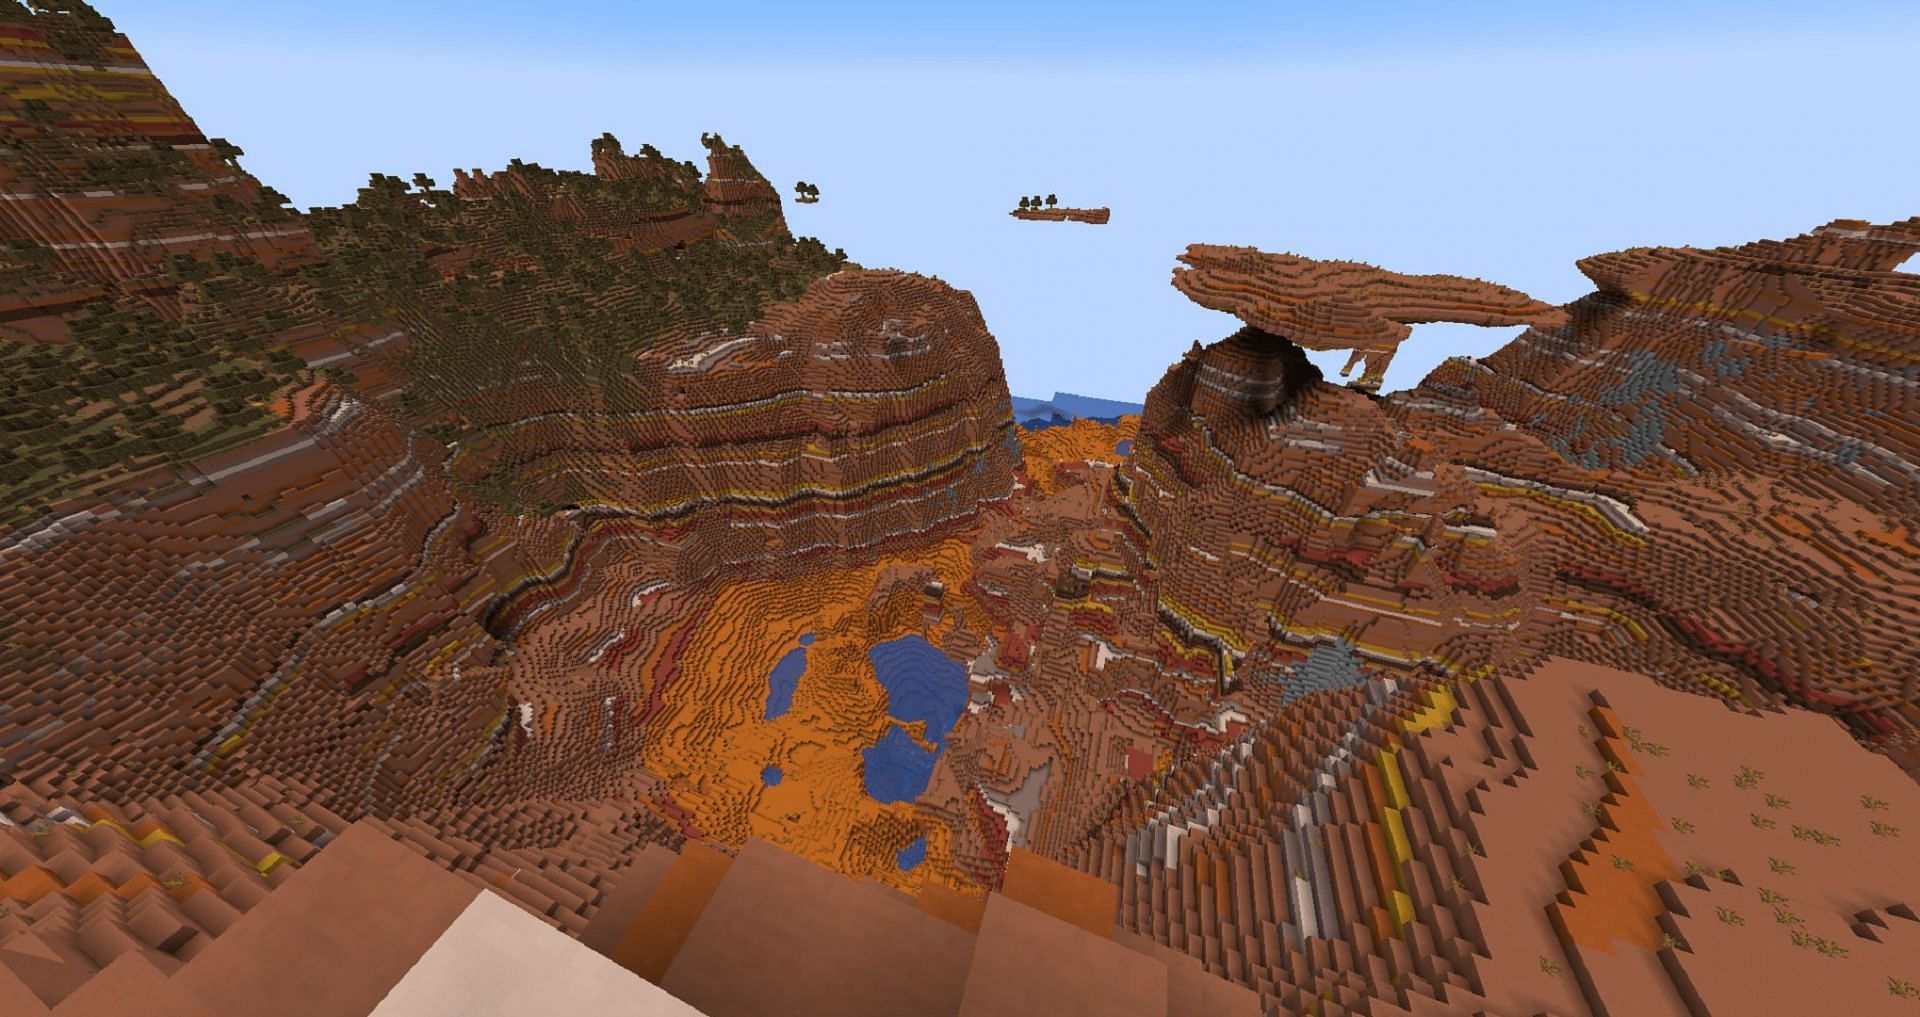 A gorgeous badlands biome awaits players in this seed (Image via u/The_Dubstep_Dalton/Reddit)